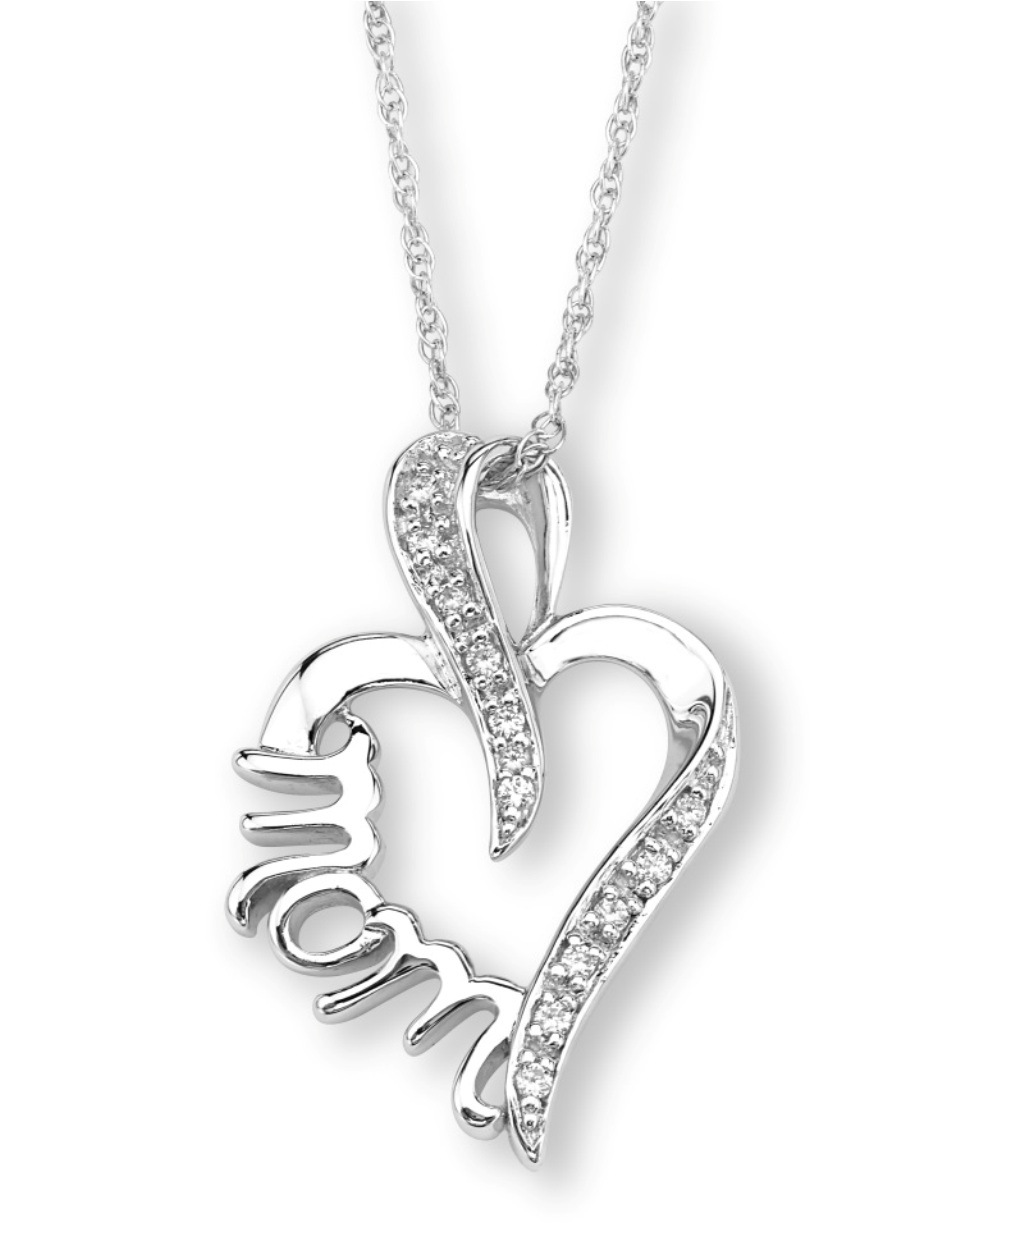  'MOM' Heart Pendant Necklace, Rhodium Plated Sterling Silver, 18